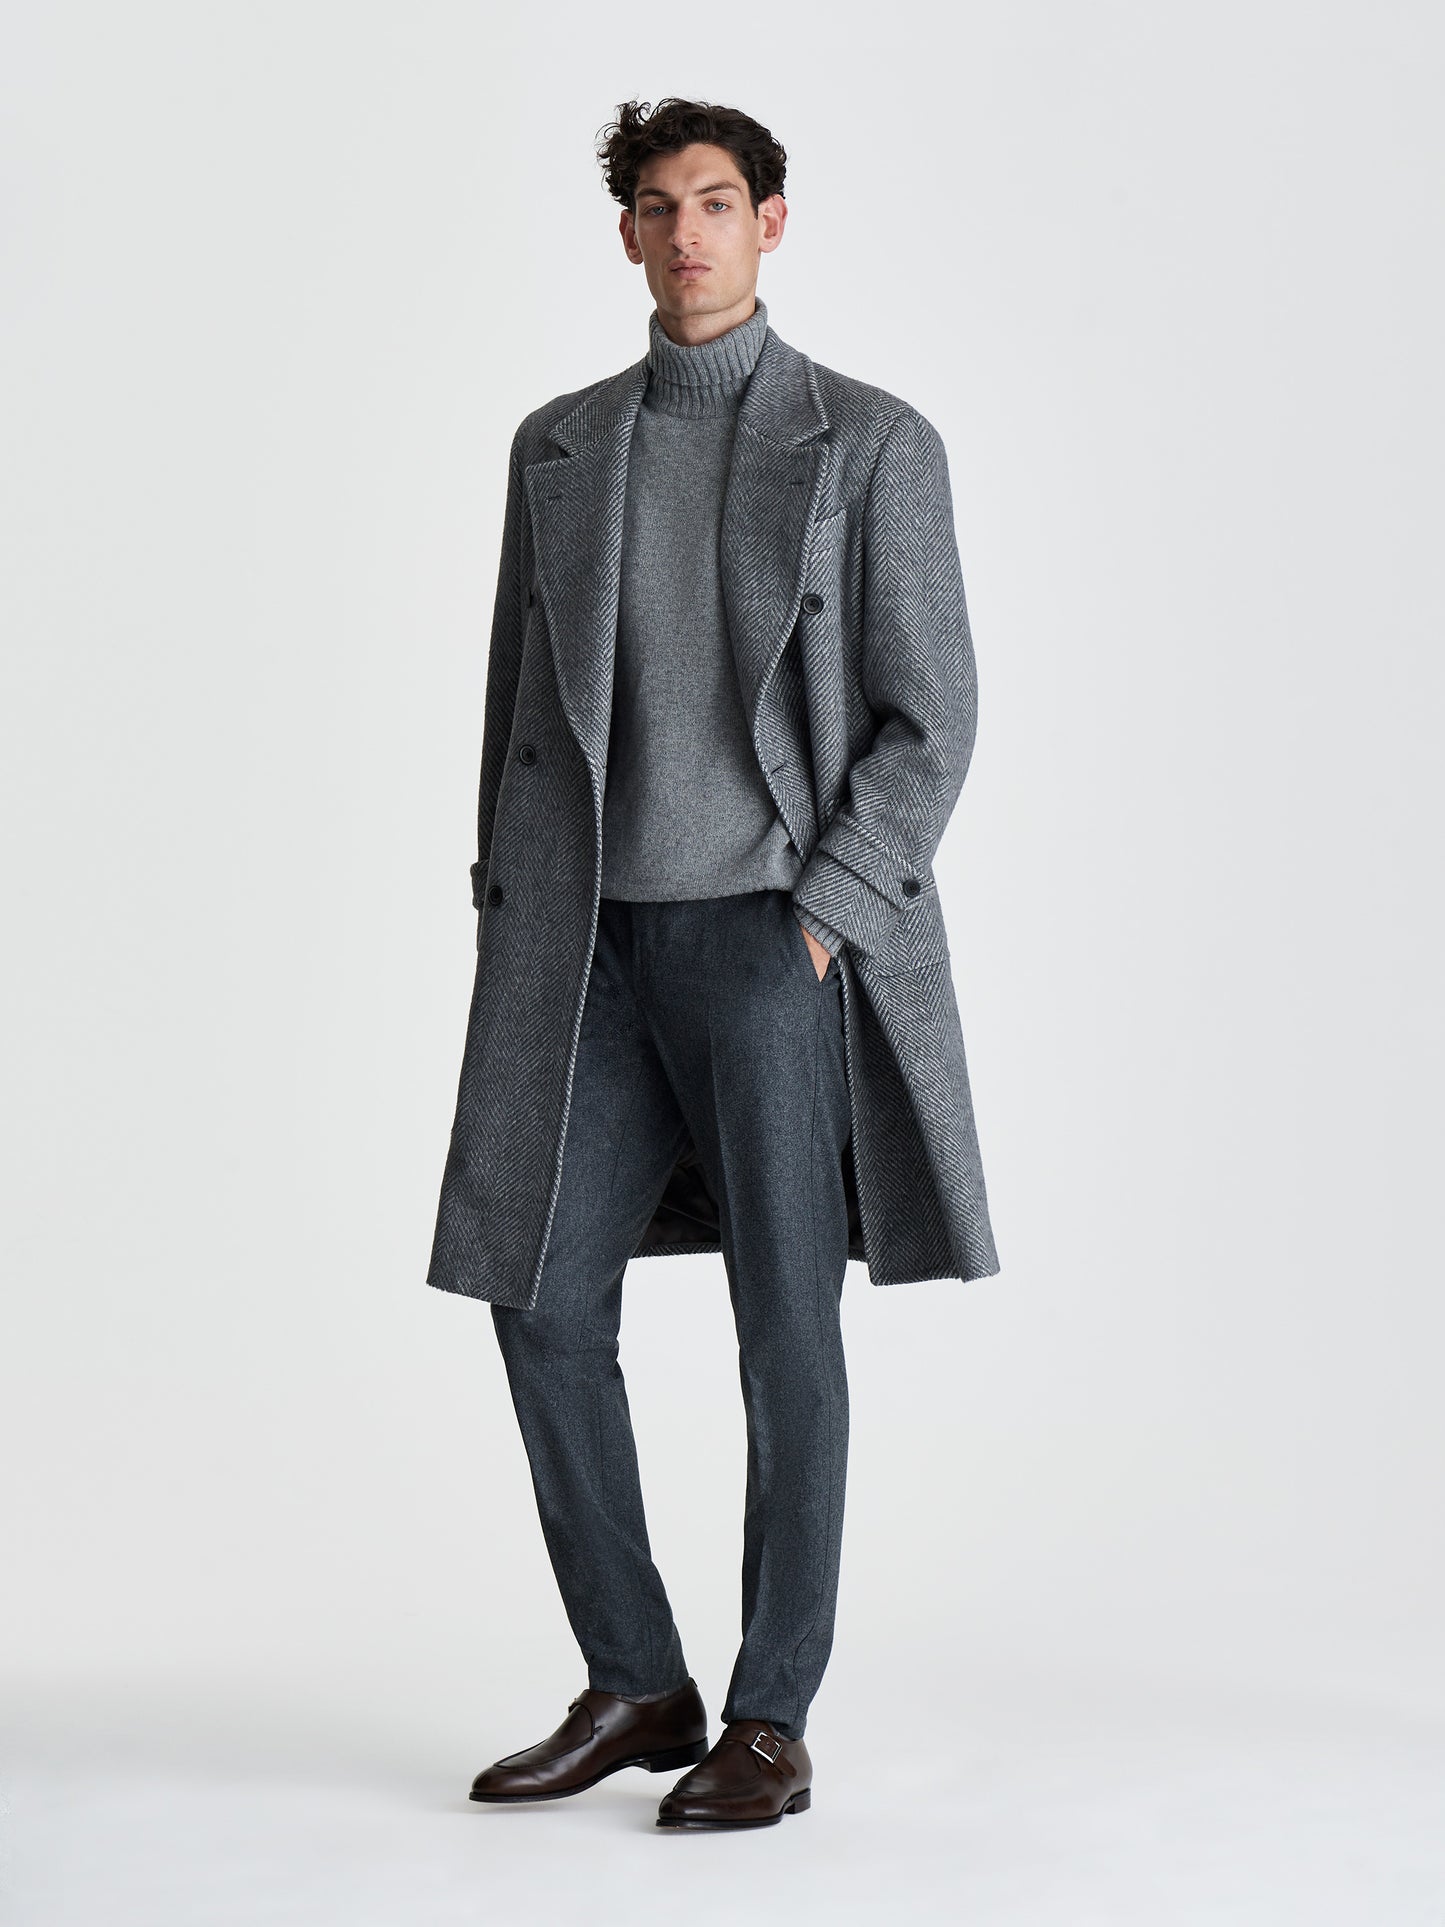 Wool Unstructured Double Breasted Overcoat Grey Twill Full Length Model Image